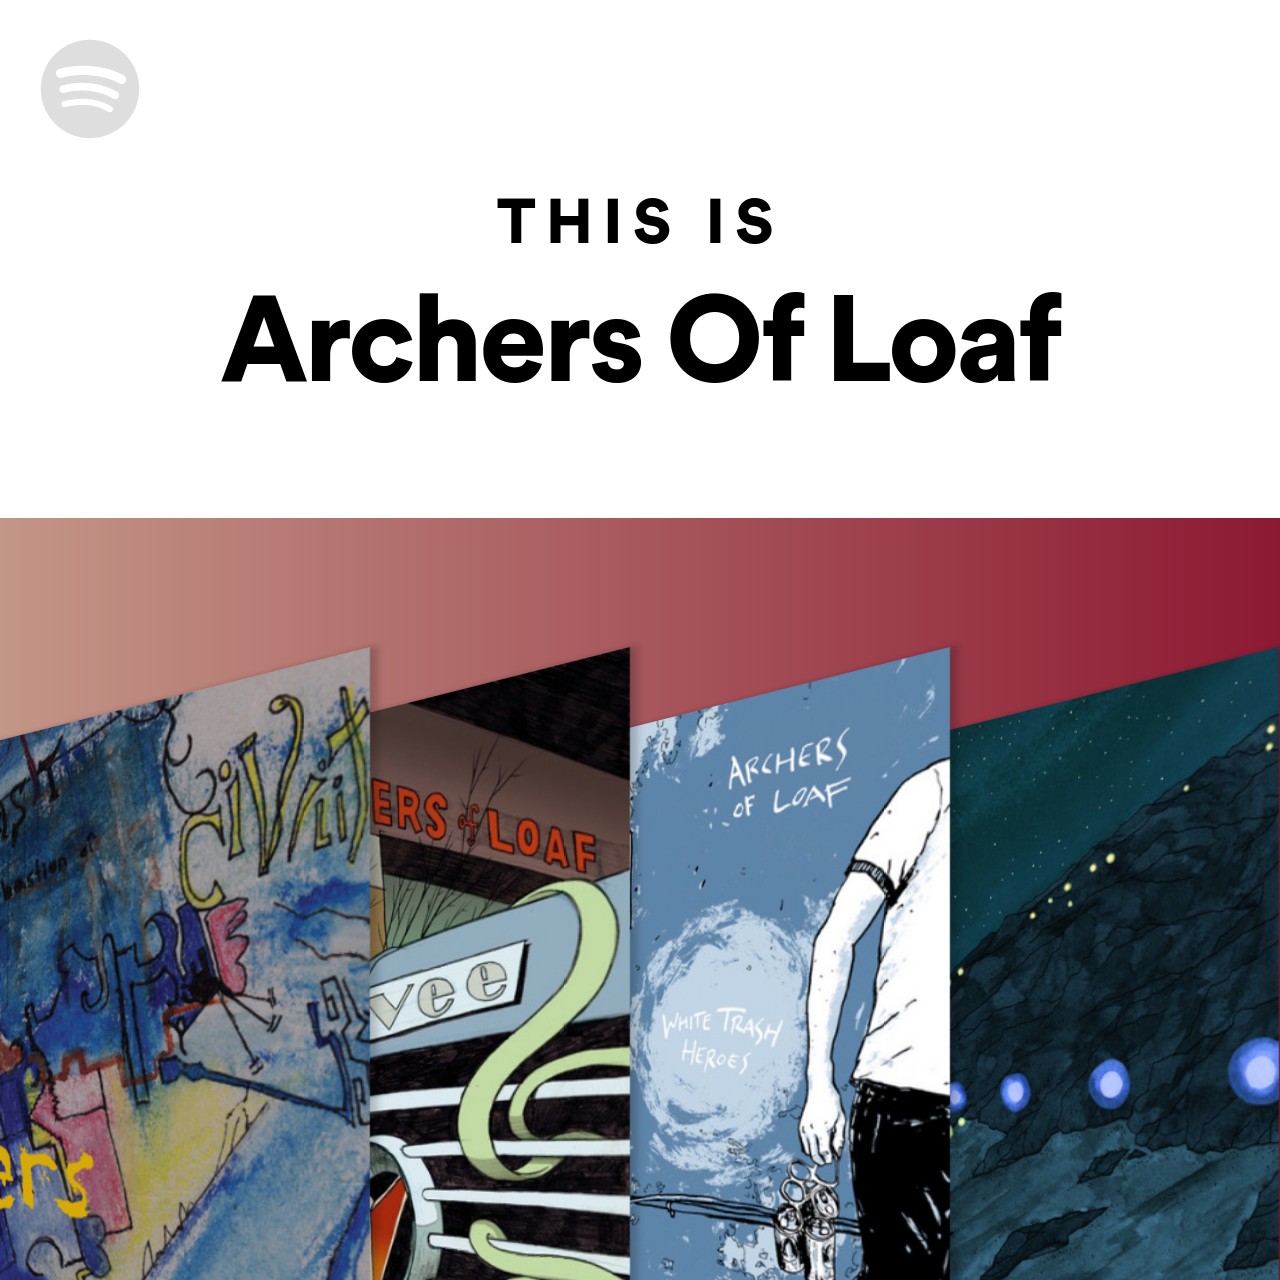 This Is Archers Of Loaf